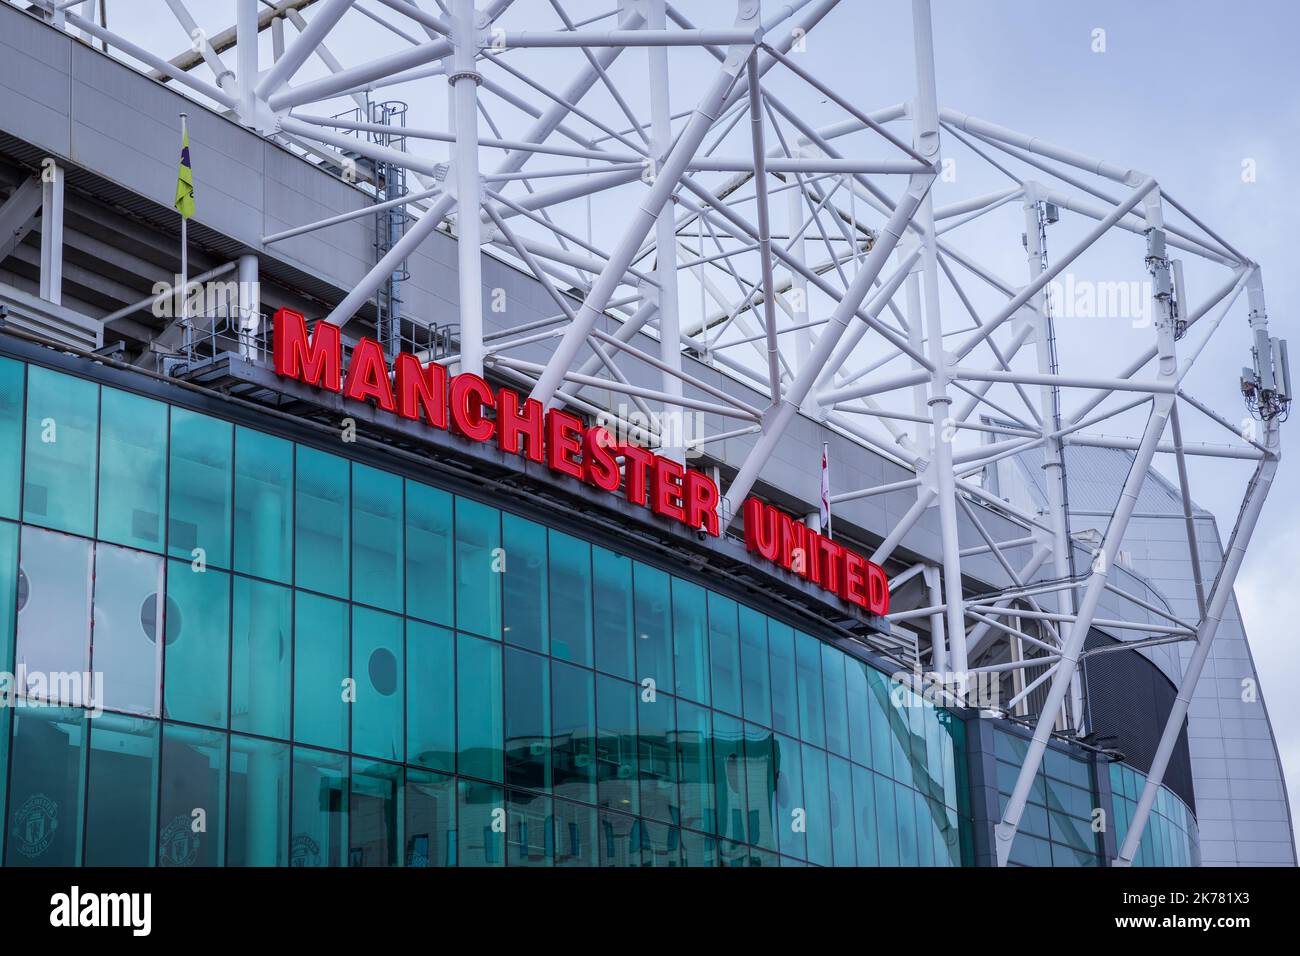 Facade of Old Trafford stadium with Manchester United's name Stock ...